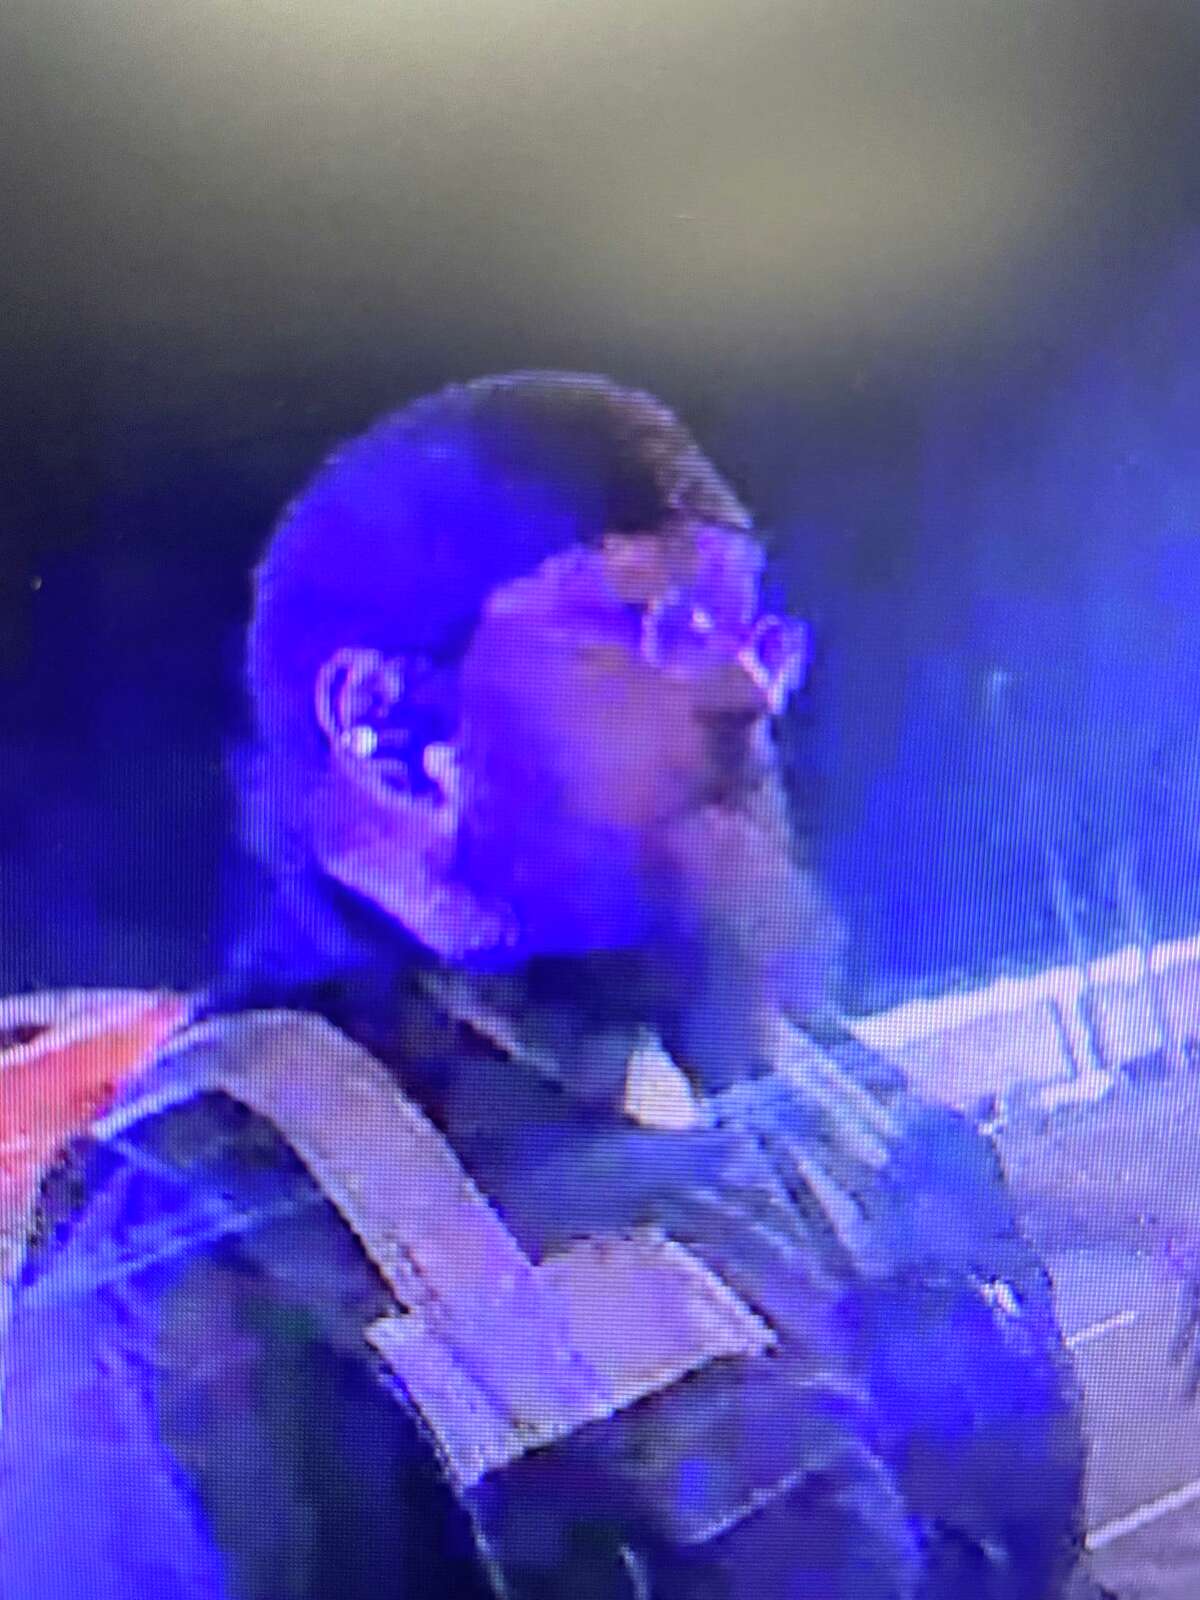 Connecticut State Police are asking for the public to help identify this man. The unidentified tow operator helped free a man from a burning car in Stamford, Conn. on Sept. 4, 2021.